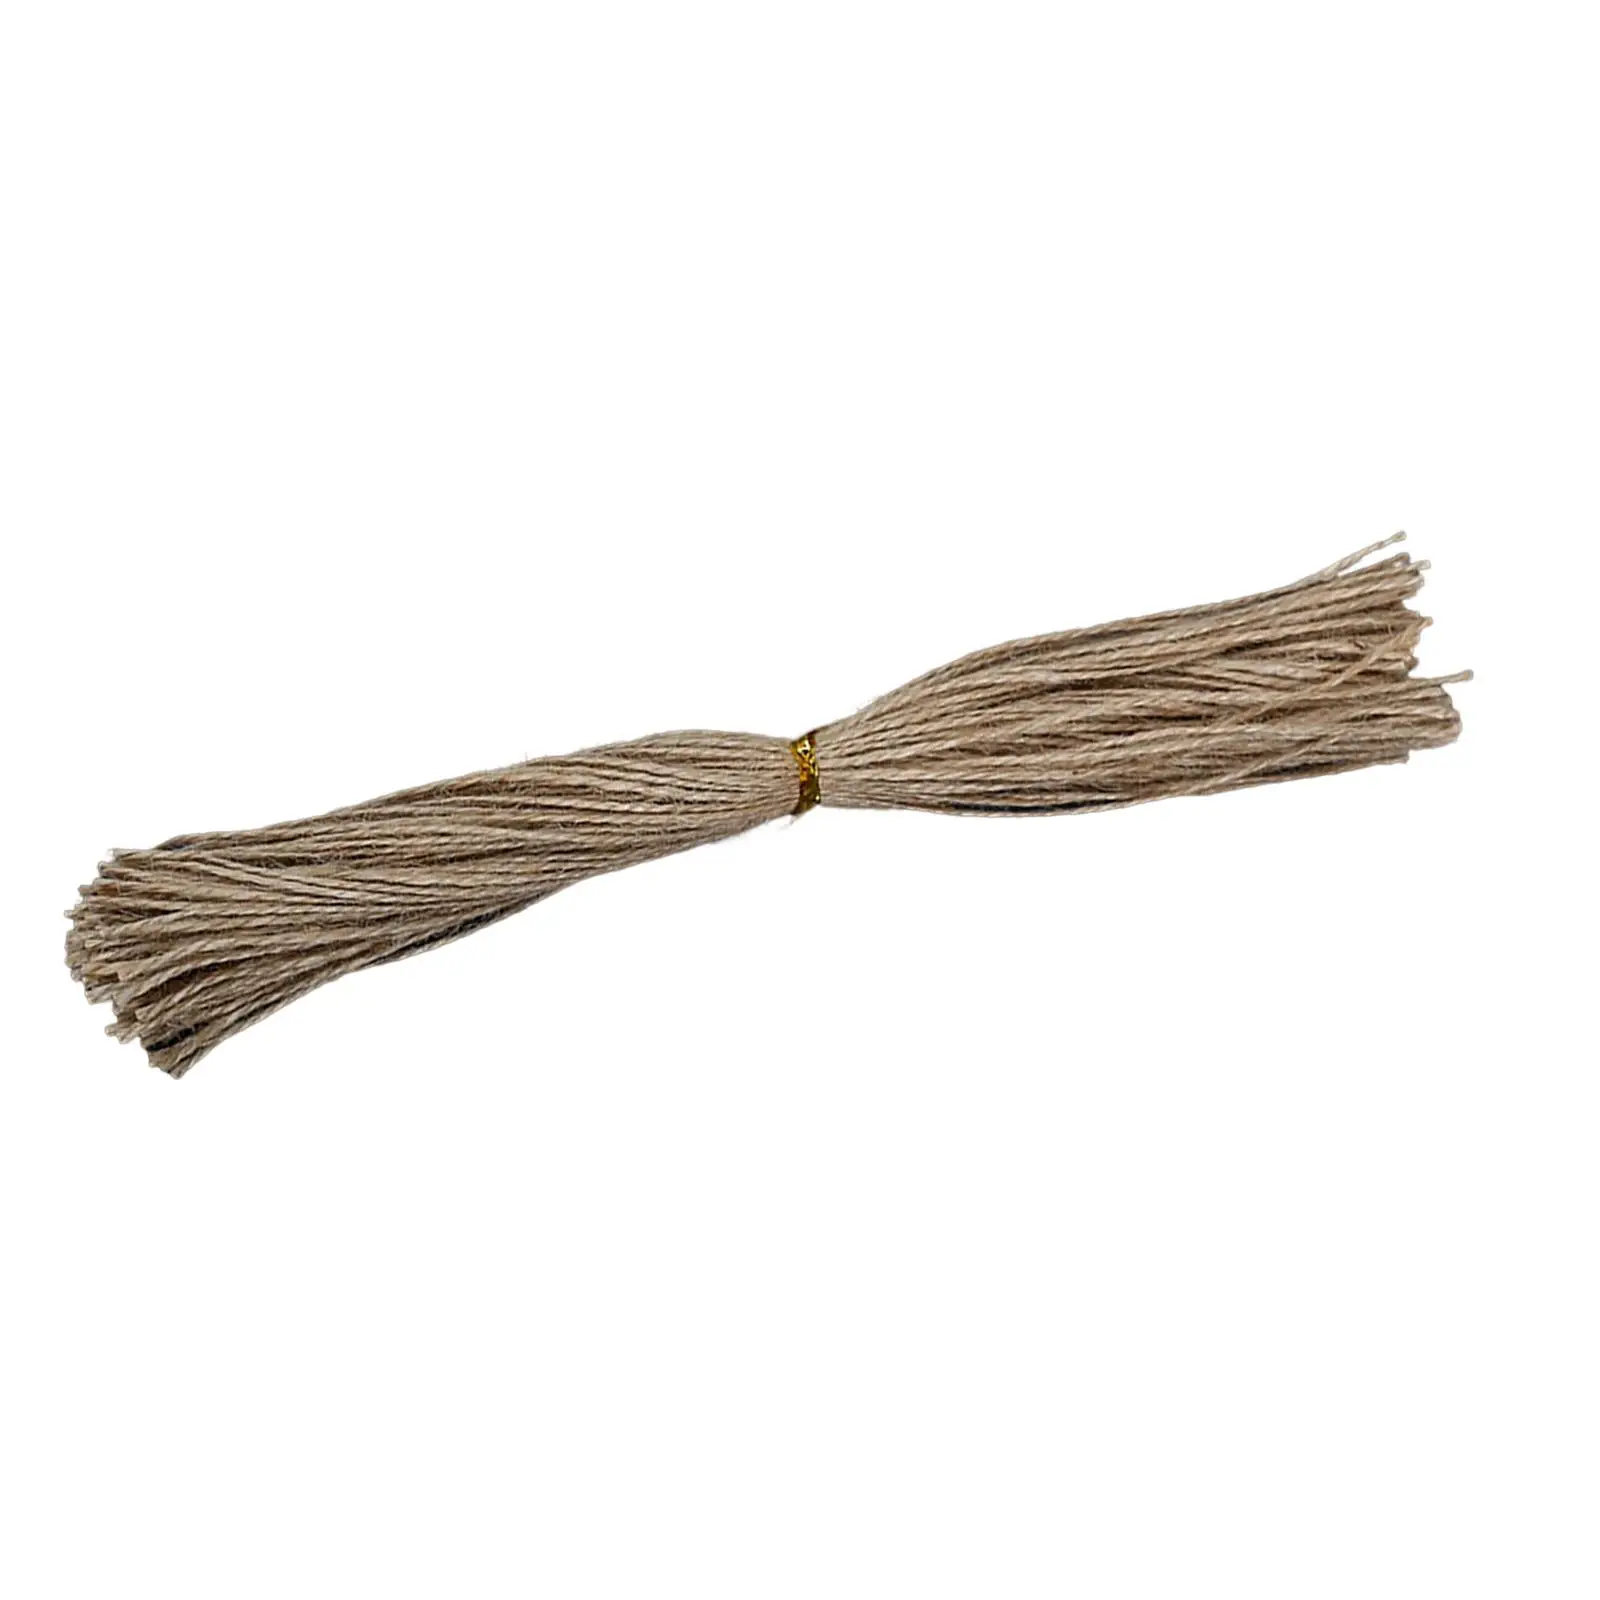 Jute Twine Rope Craft Twine Rope Present Wrapping Cord Packing String for Crafts Tags Cards